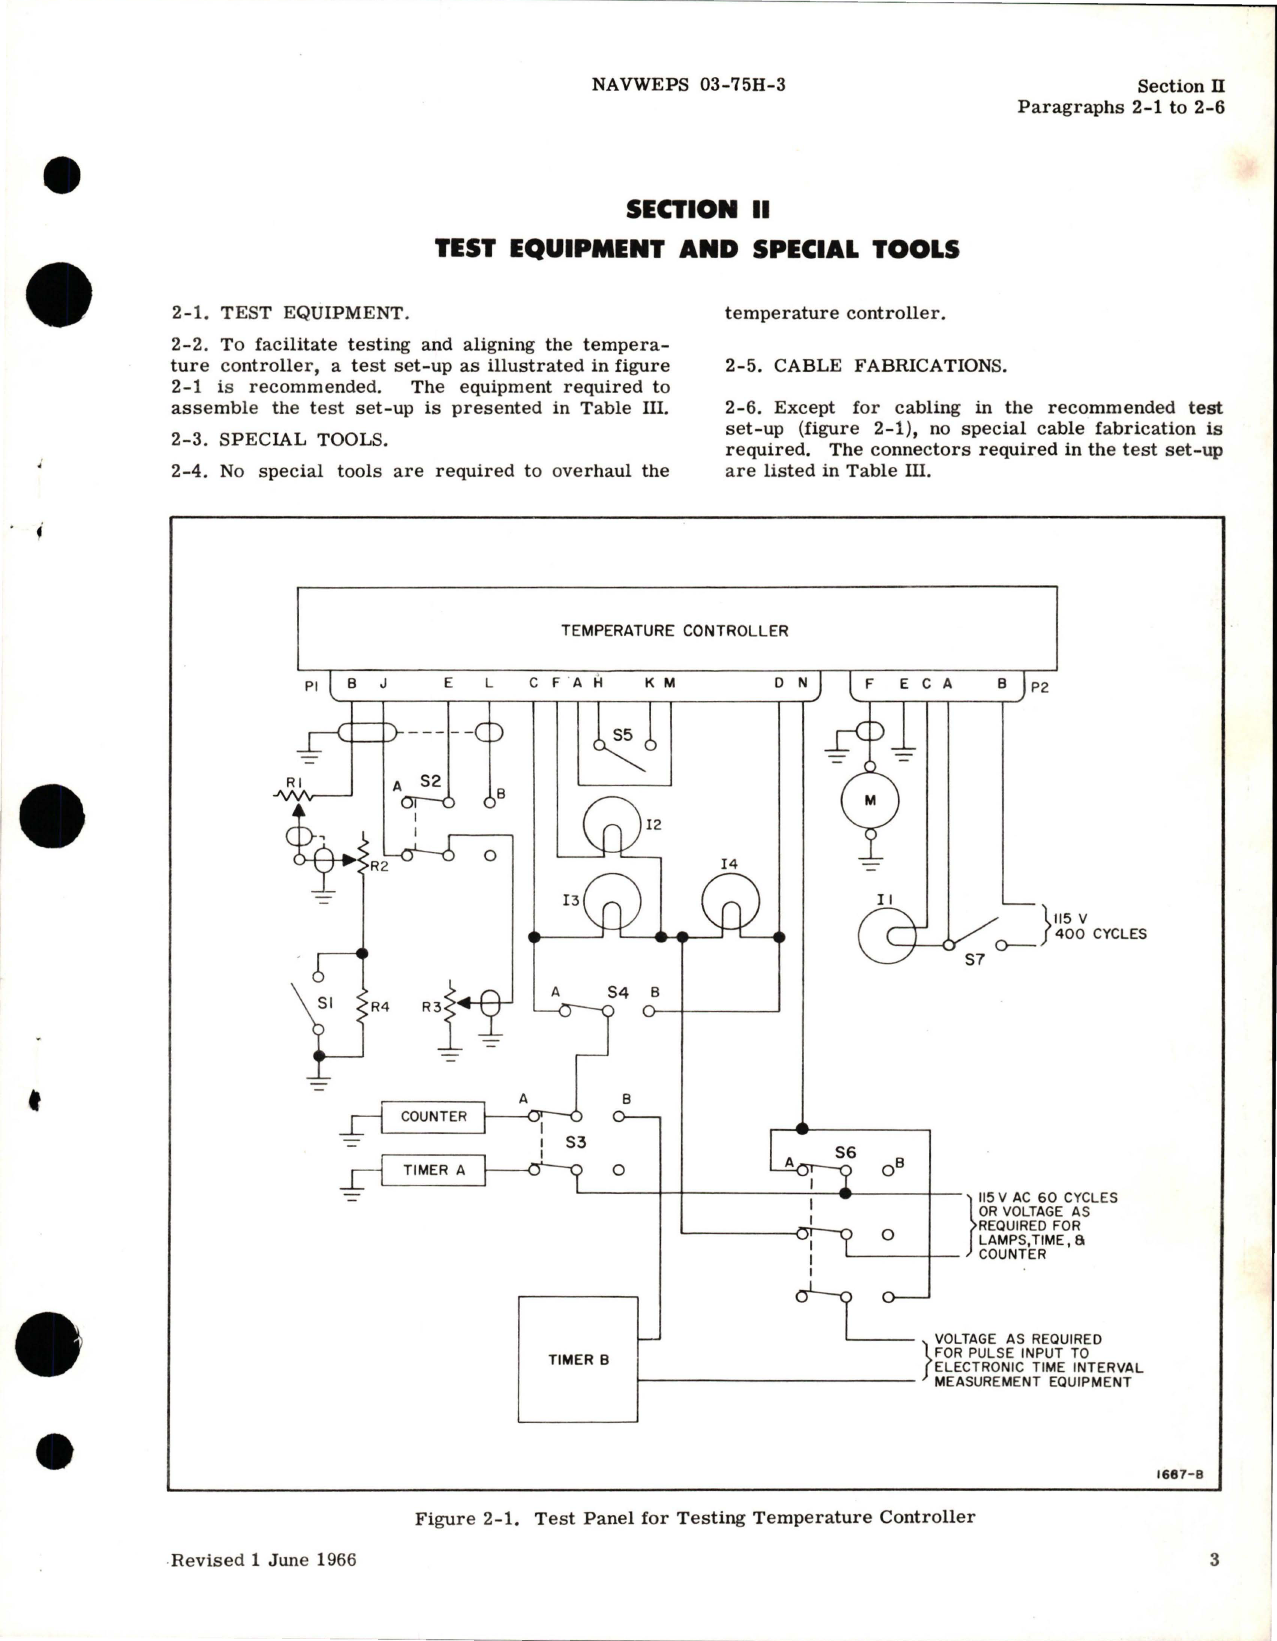 Sample page 7 from AirCorps Library document: Overhaul Instructions for Temperature Controller - Parts 25730028-03 and 25730028-04